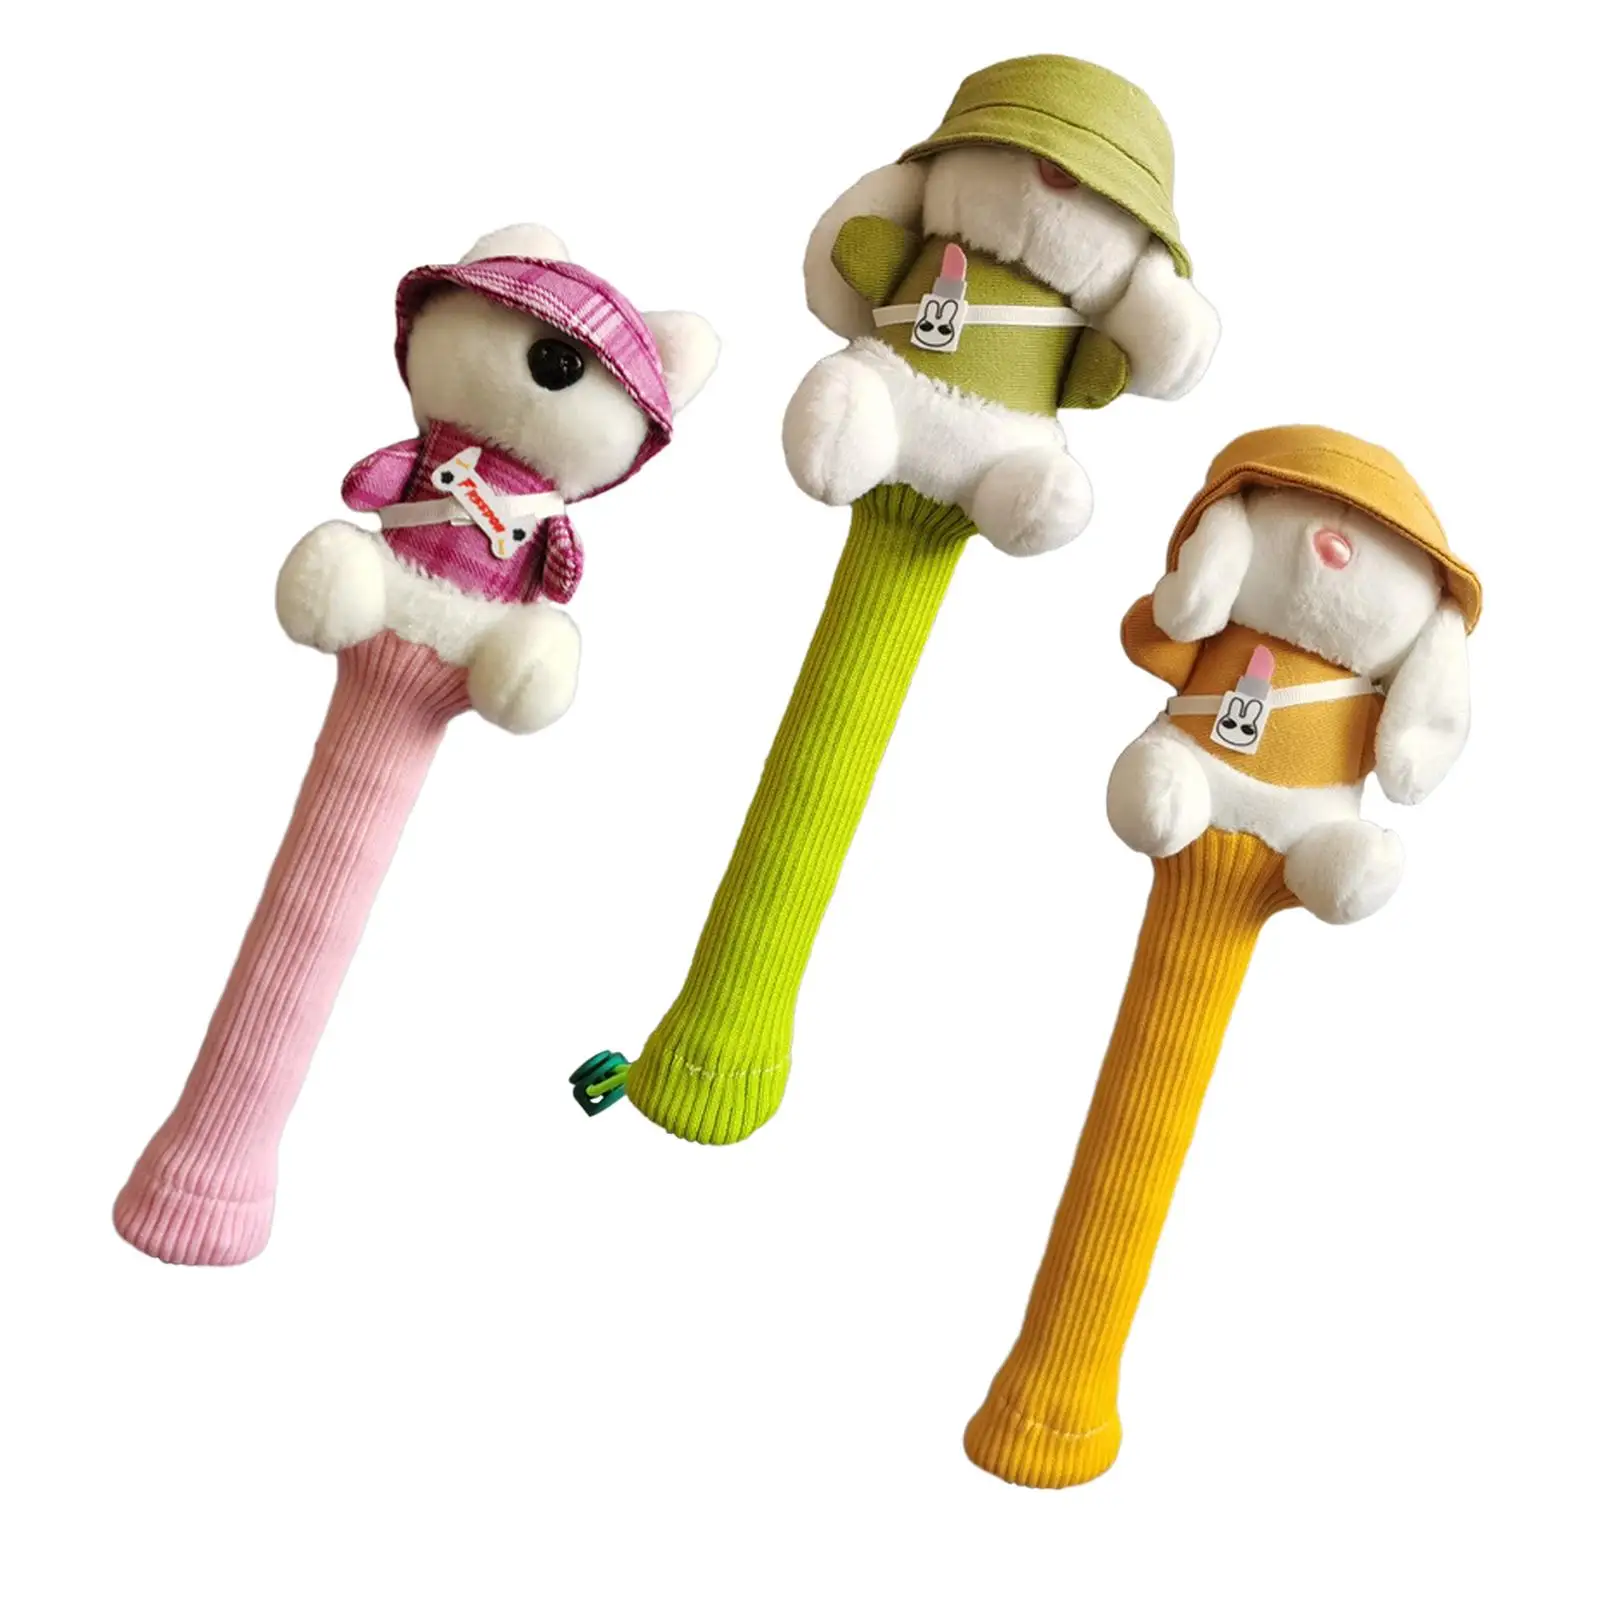 Badminton Racket Handle Cover Cute Anti Slip for Active Players Stuffed Doll